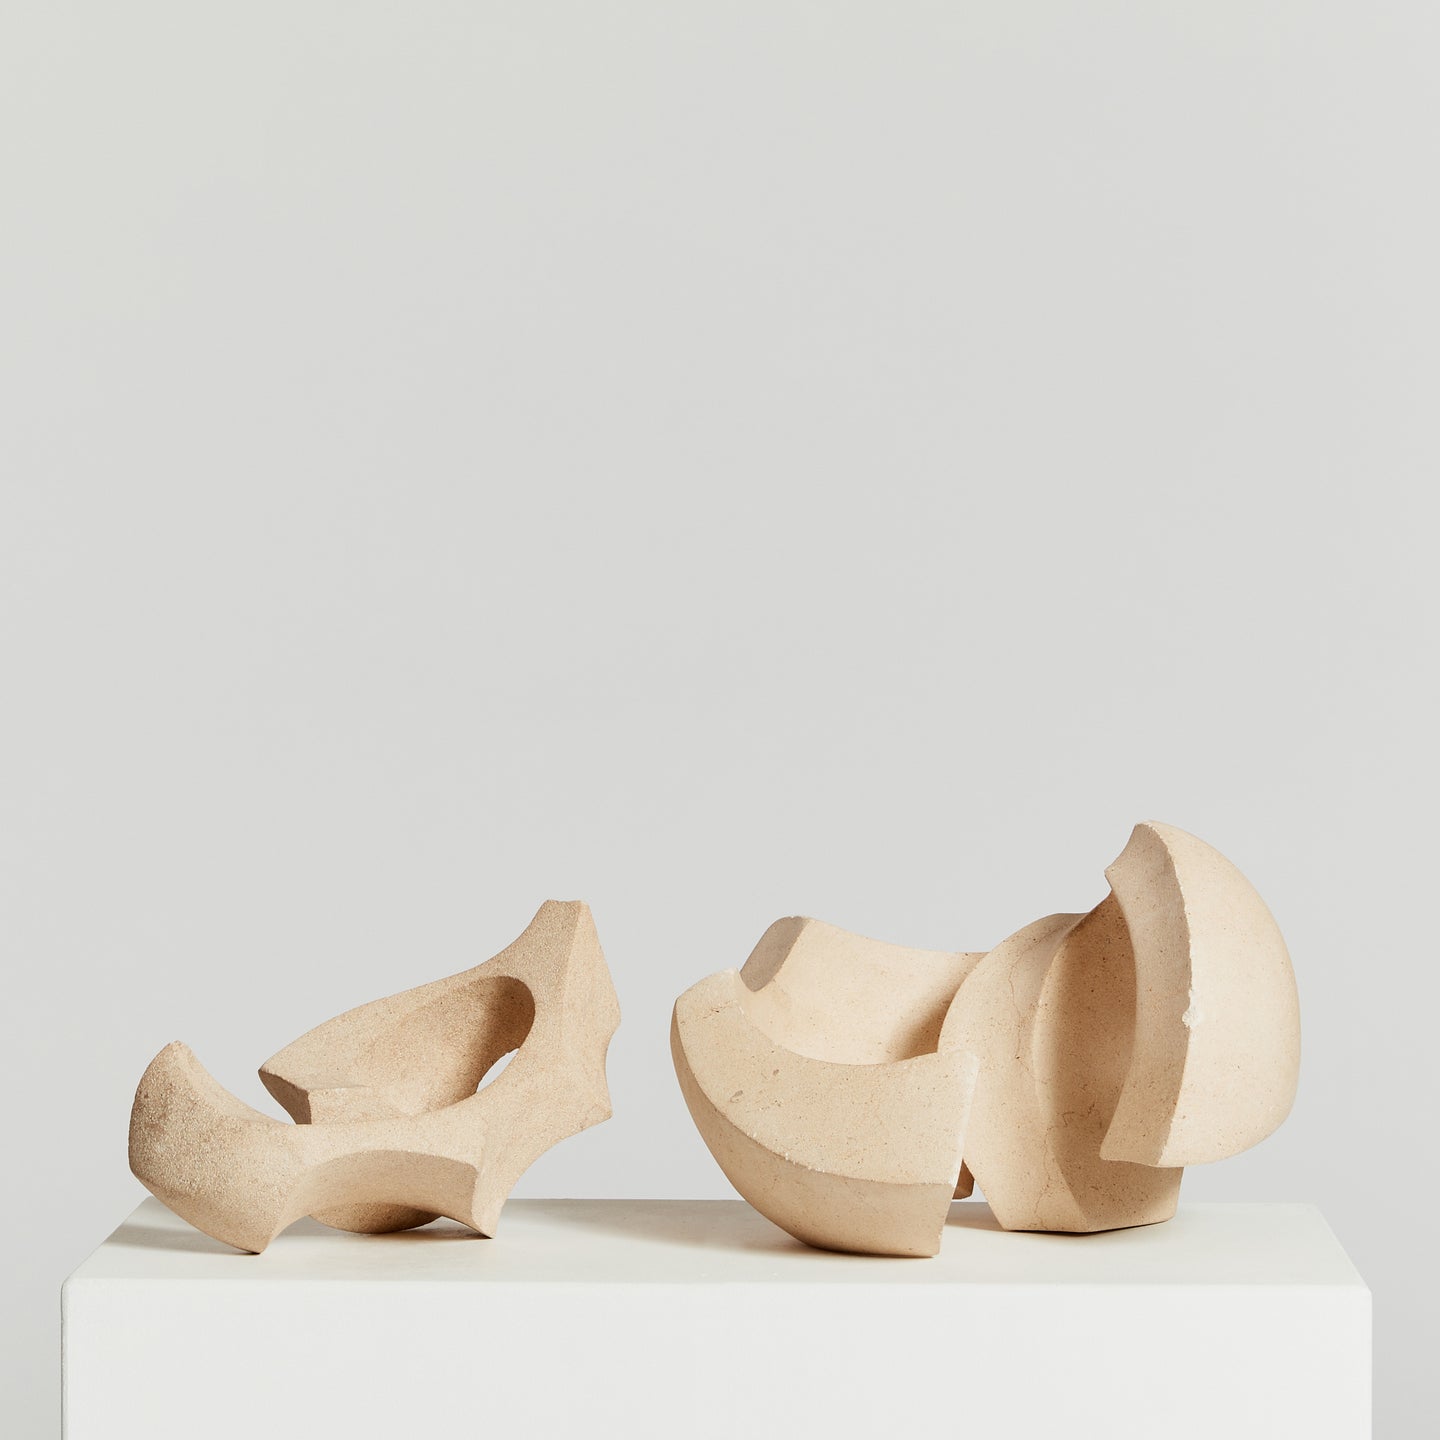 Pair of abstract limestone sculptures